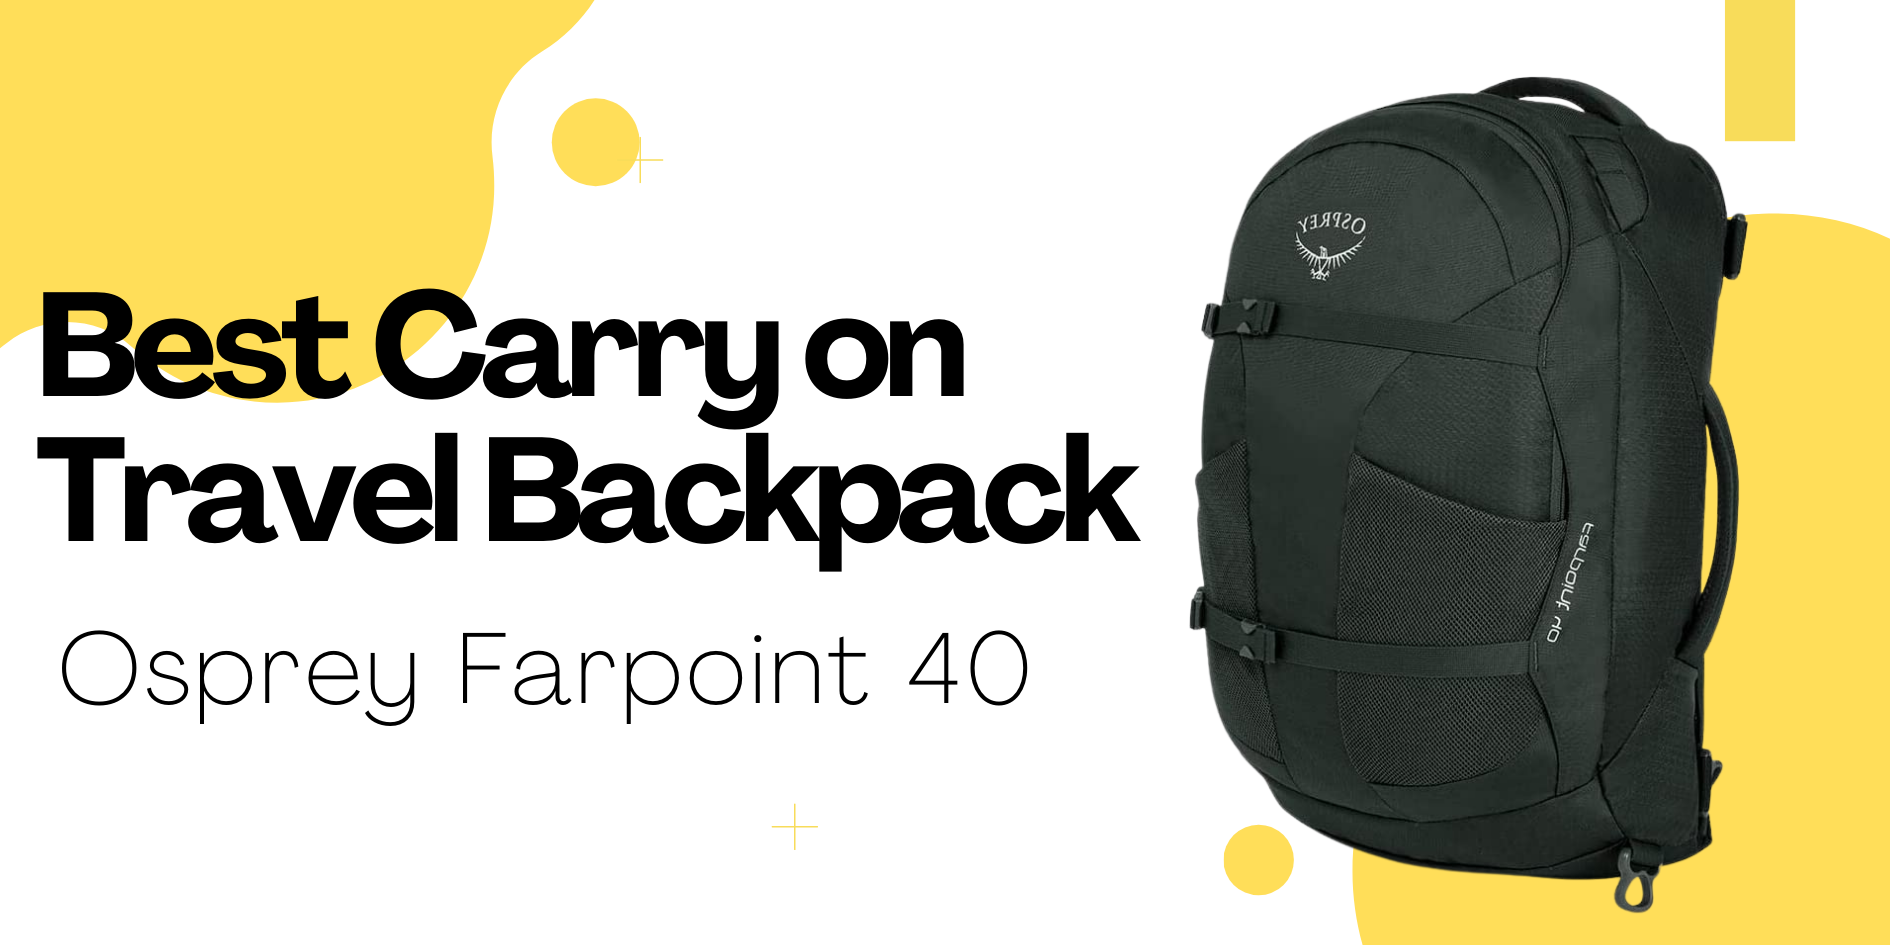 Best Carry on Travel Backpack